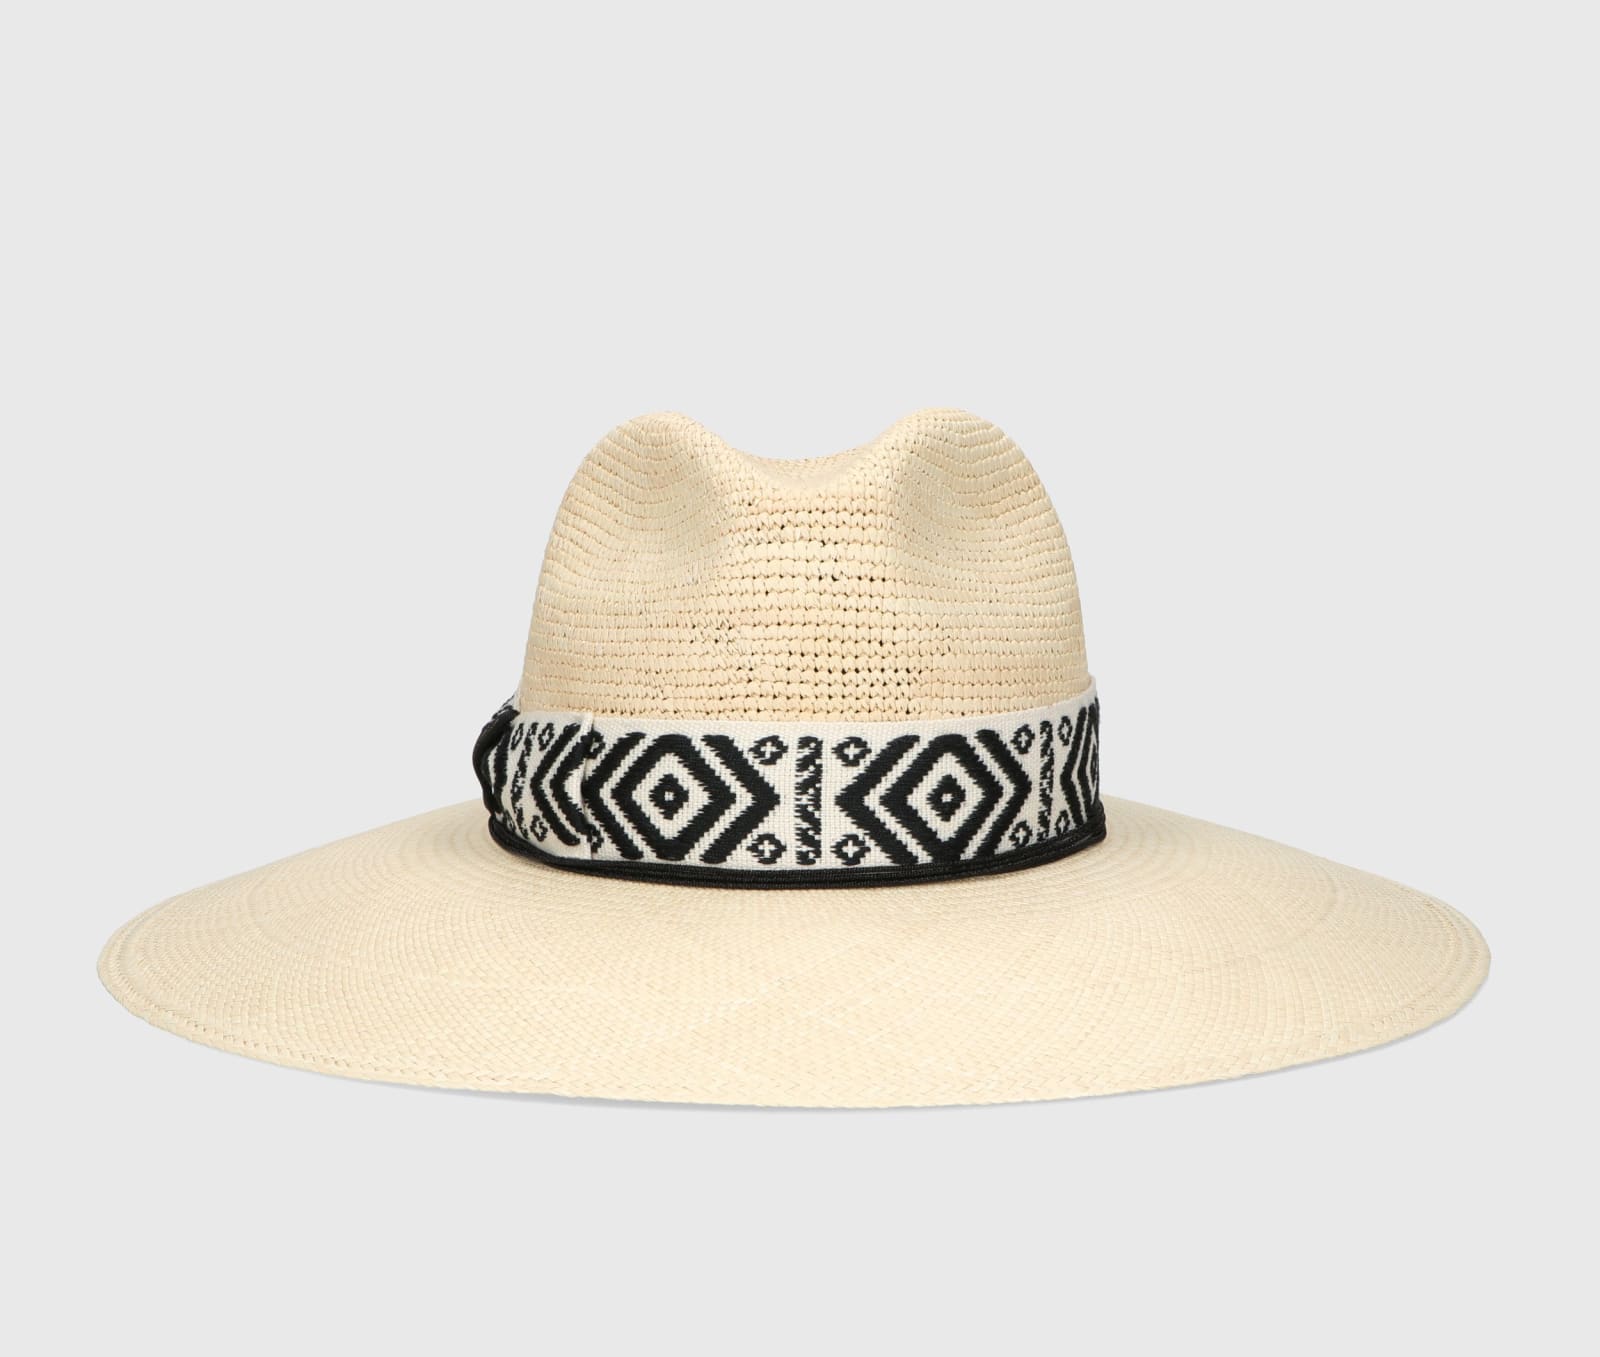 Shop Borsalino Sophie Panama Semicrochet Patterned Hatband In Natural, Patterned Black/cream Hat Band